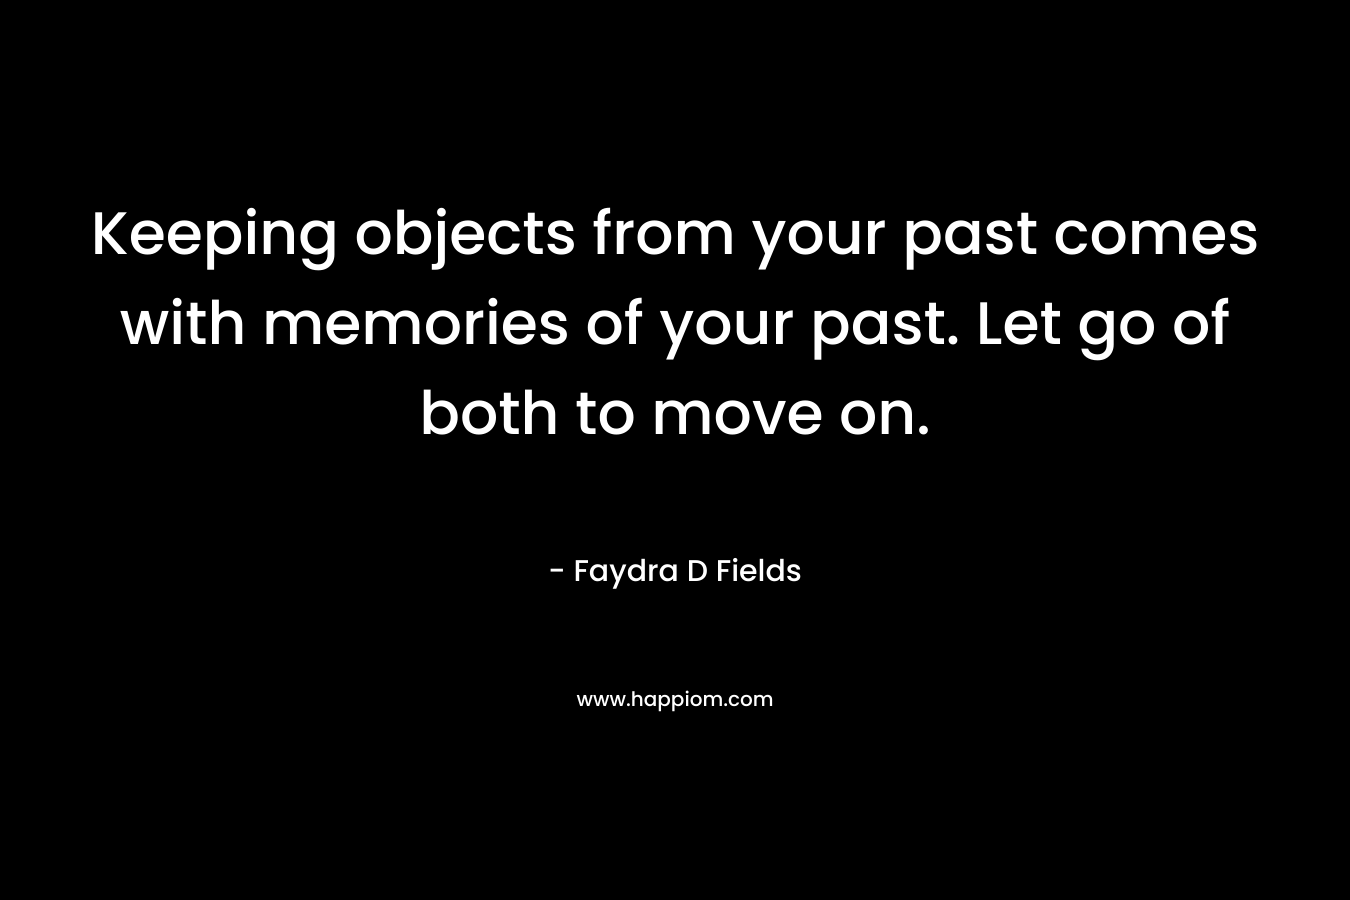 Keeping objects from your past comes with memories of your past. Let go of both to move on. – Faydra D Fields